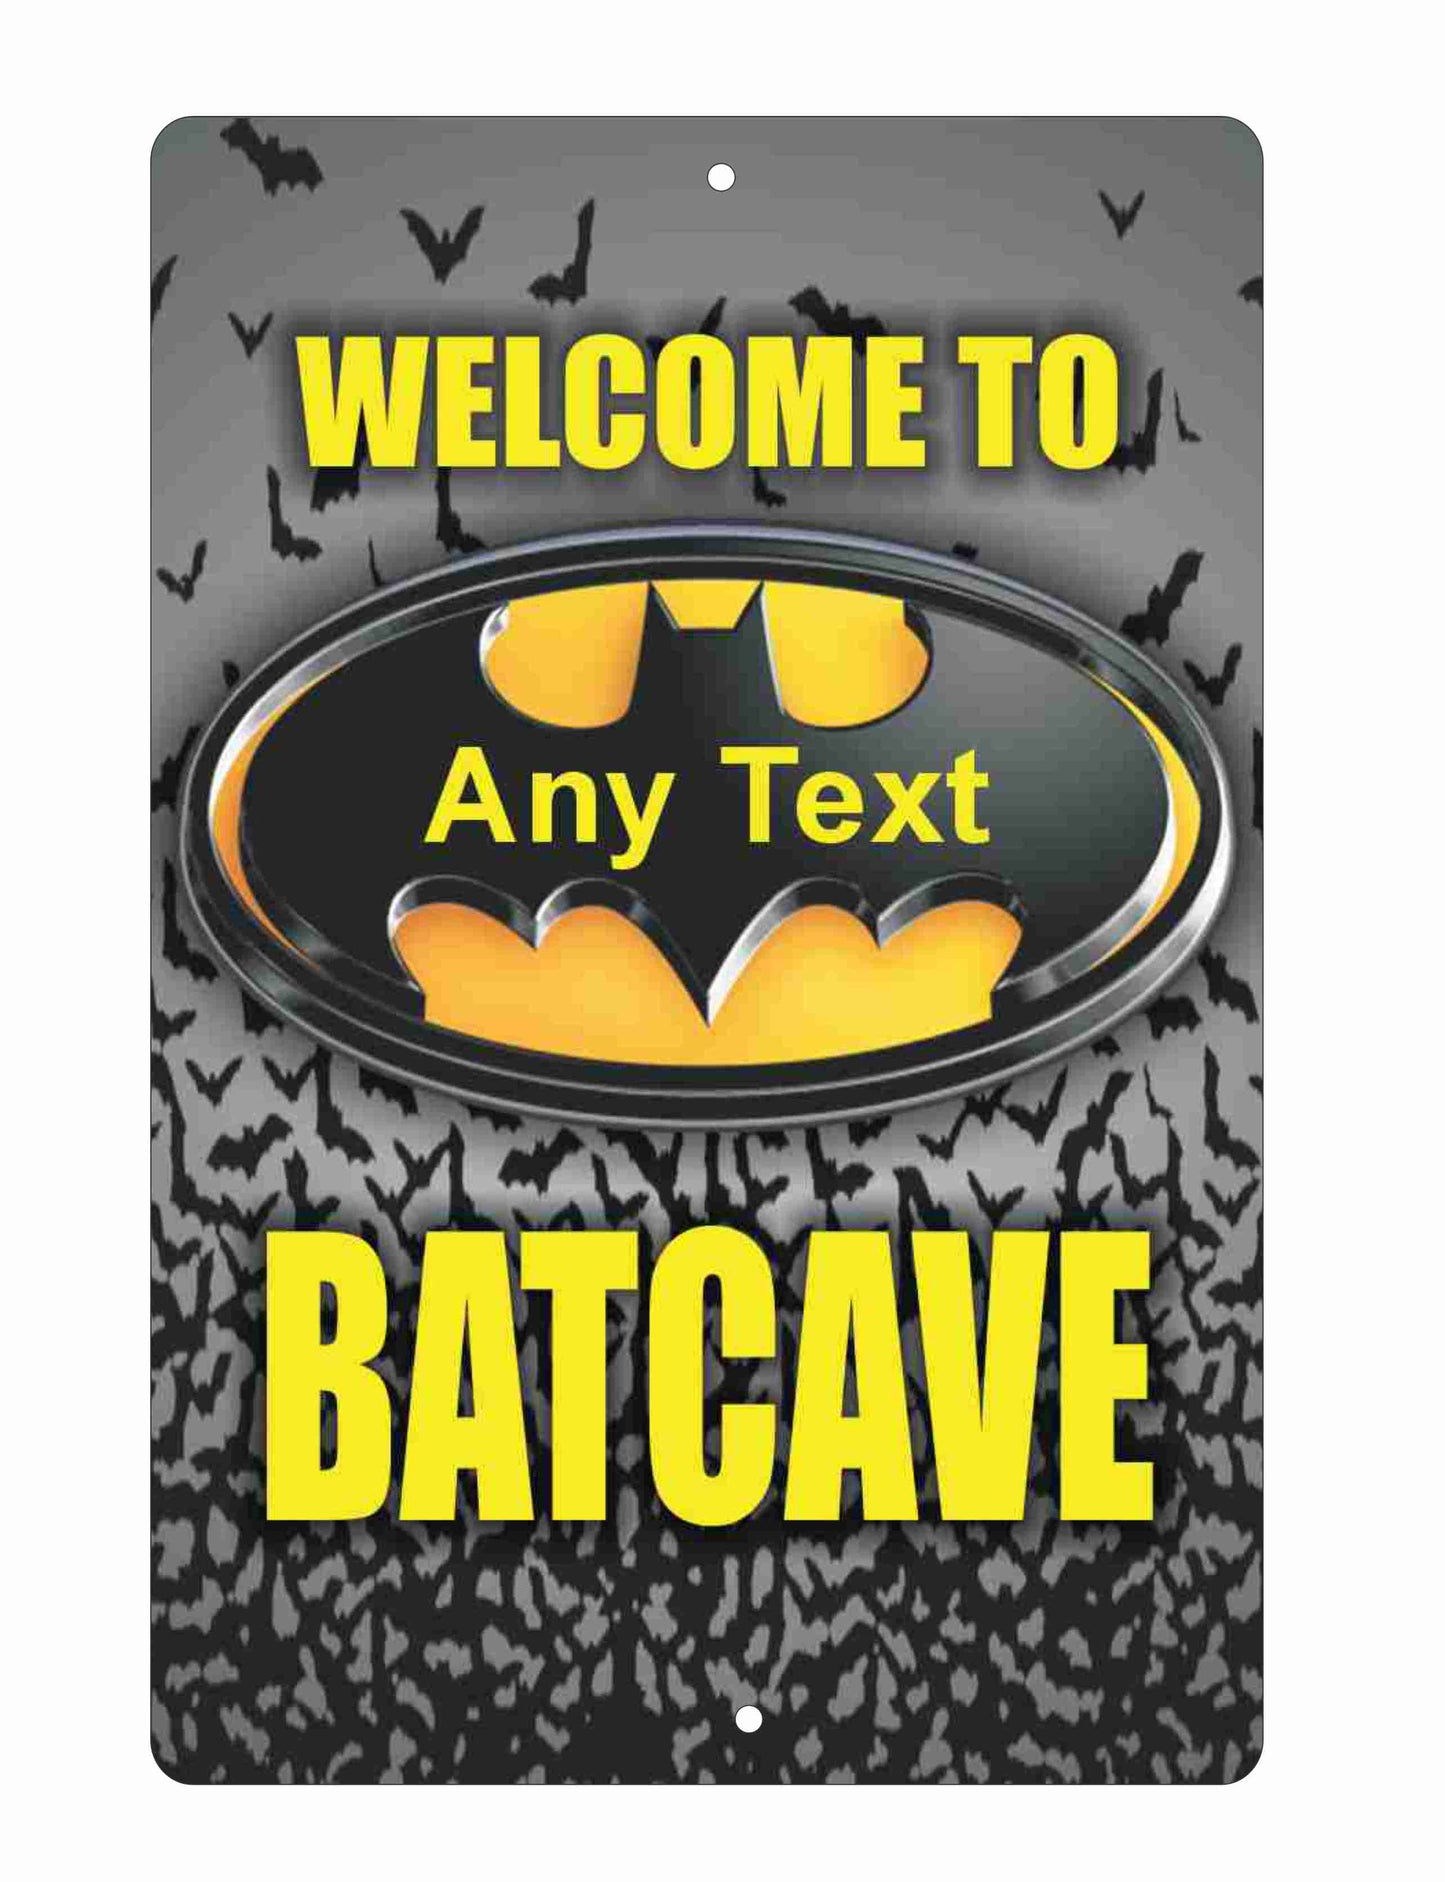 Batcave aluminum sign personalized with any name